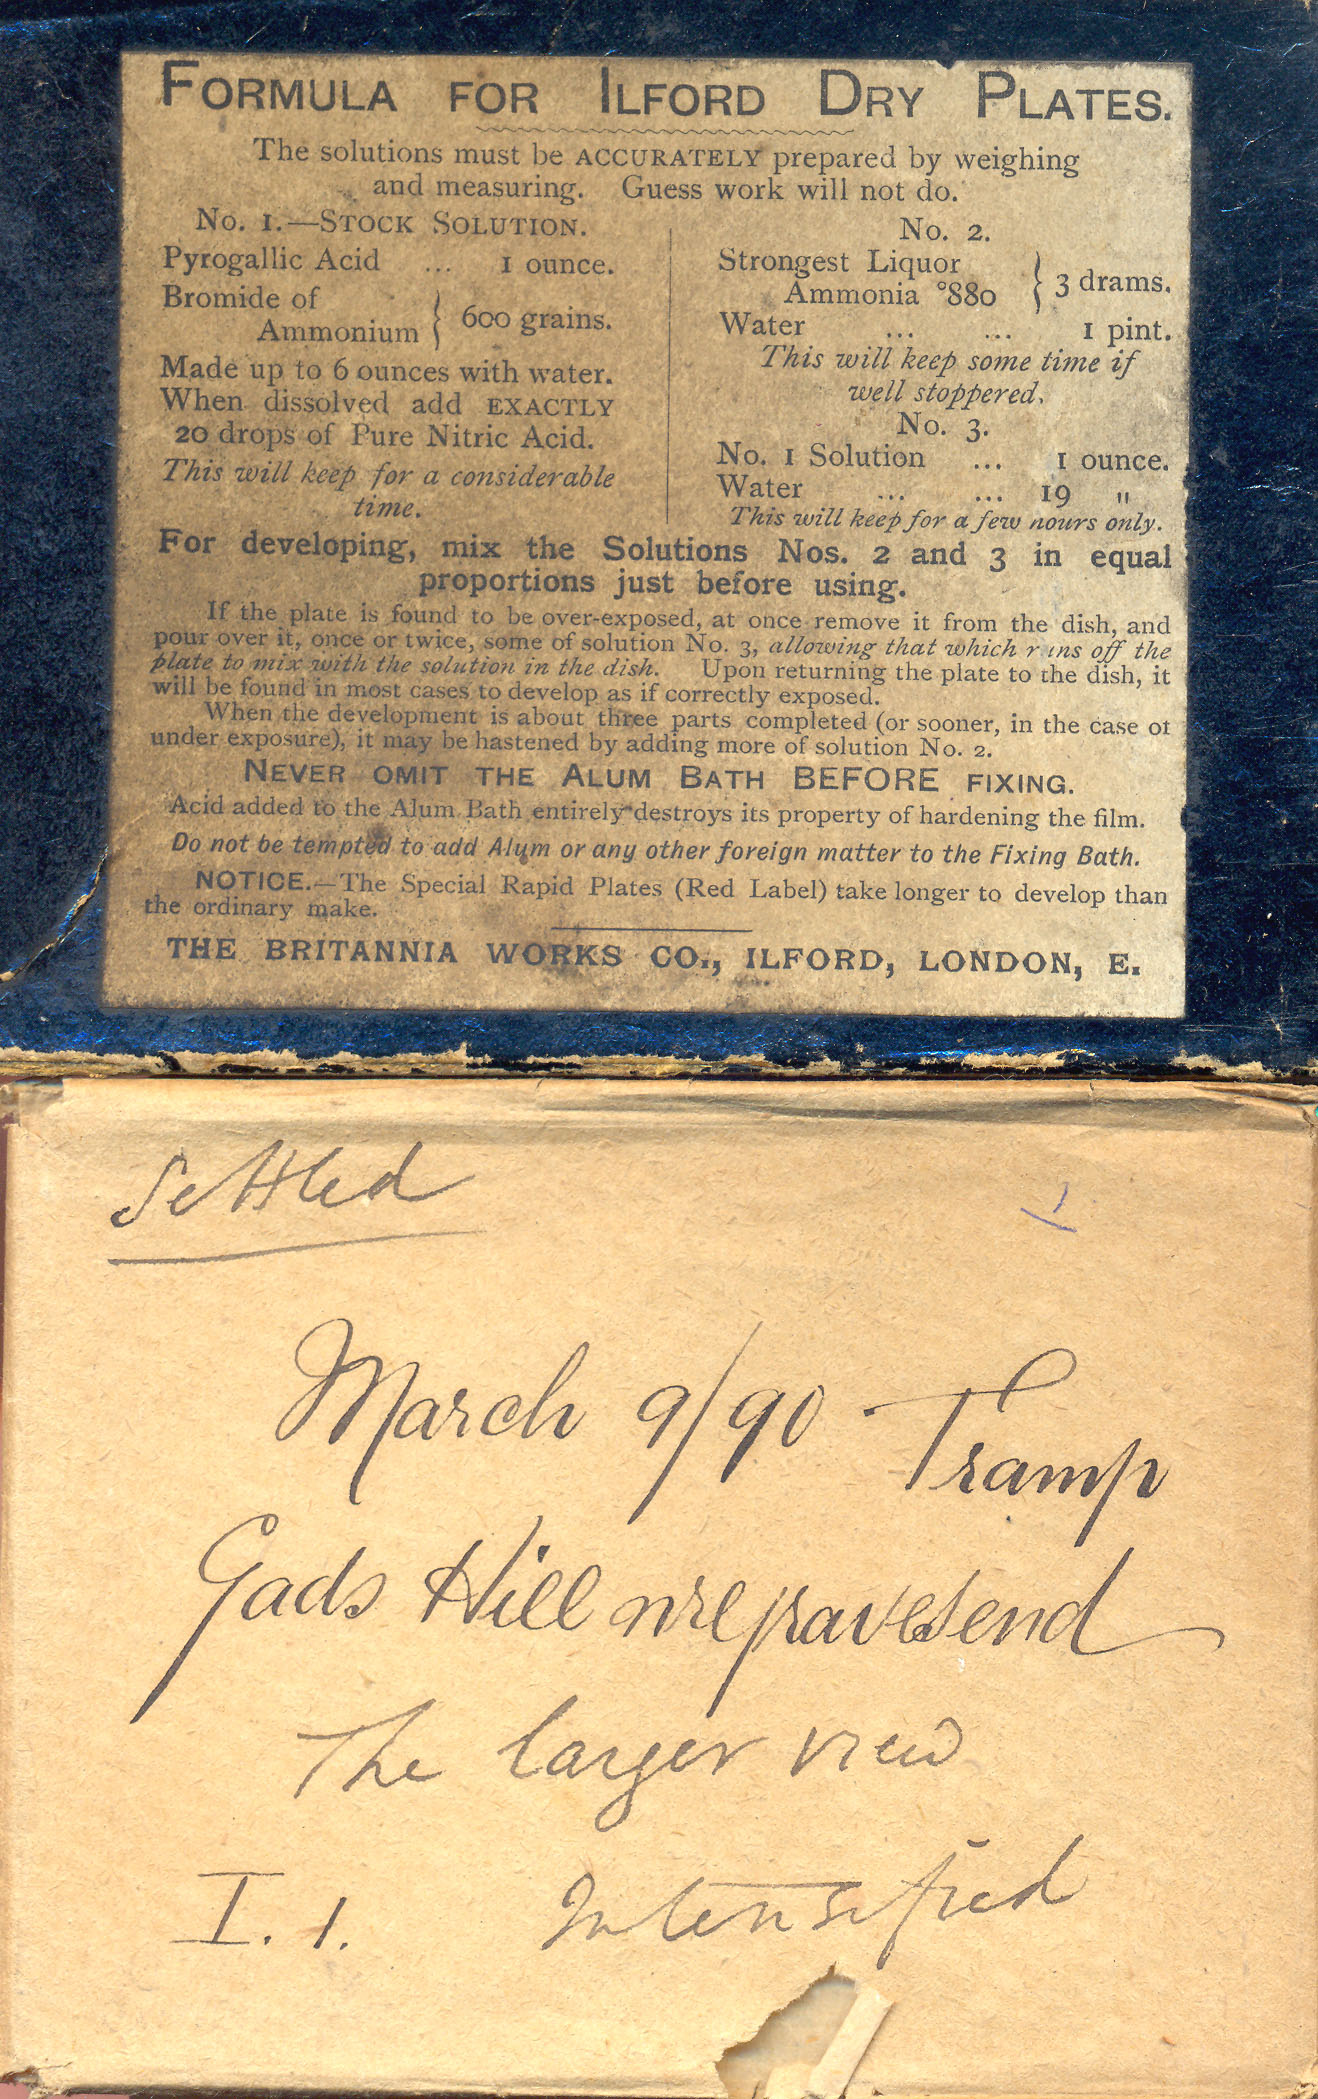 Original box and envelope for one of Butler's dry plates